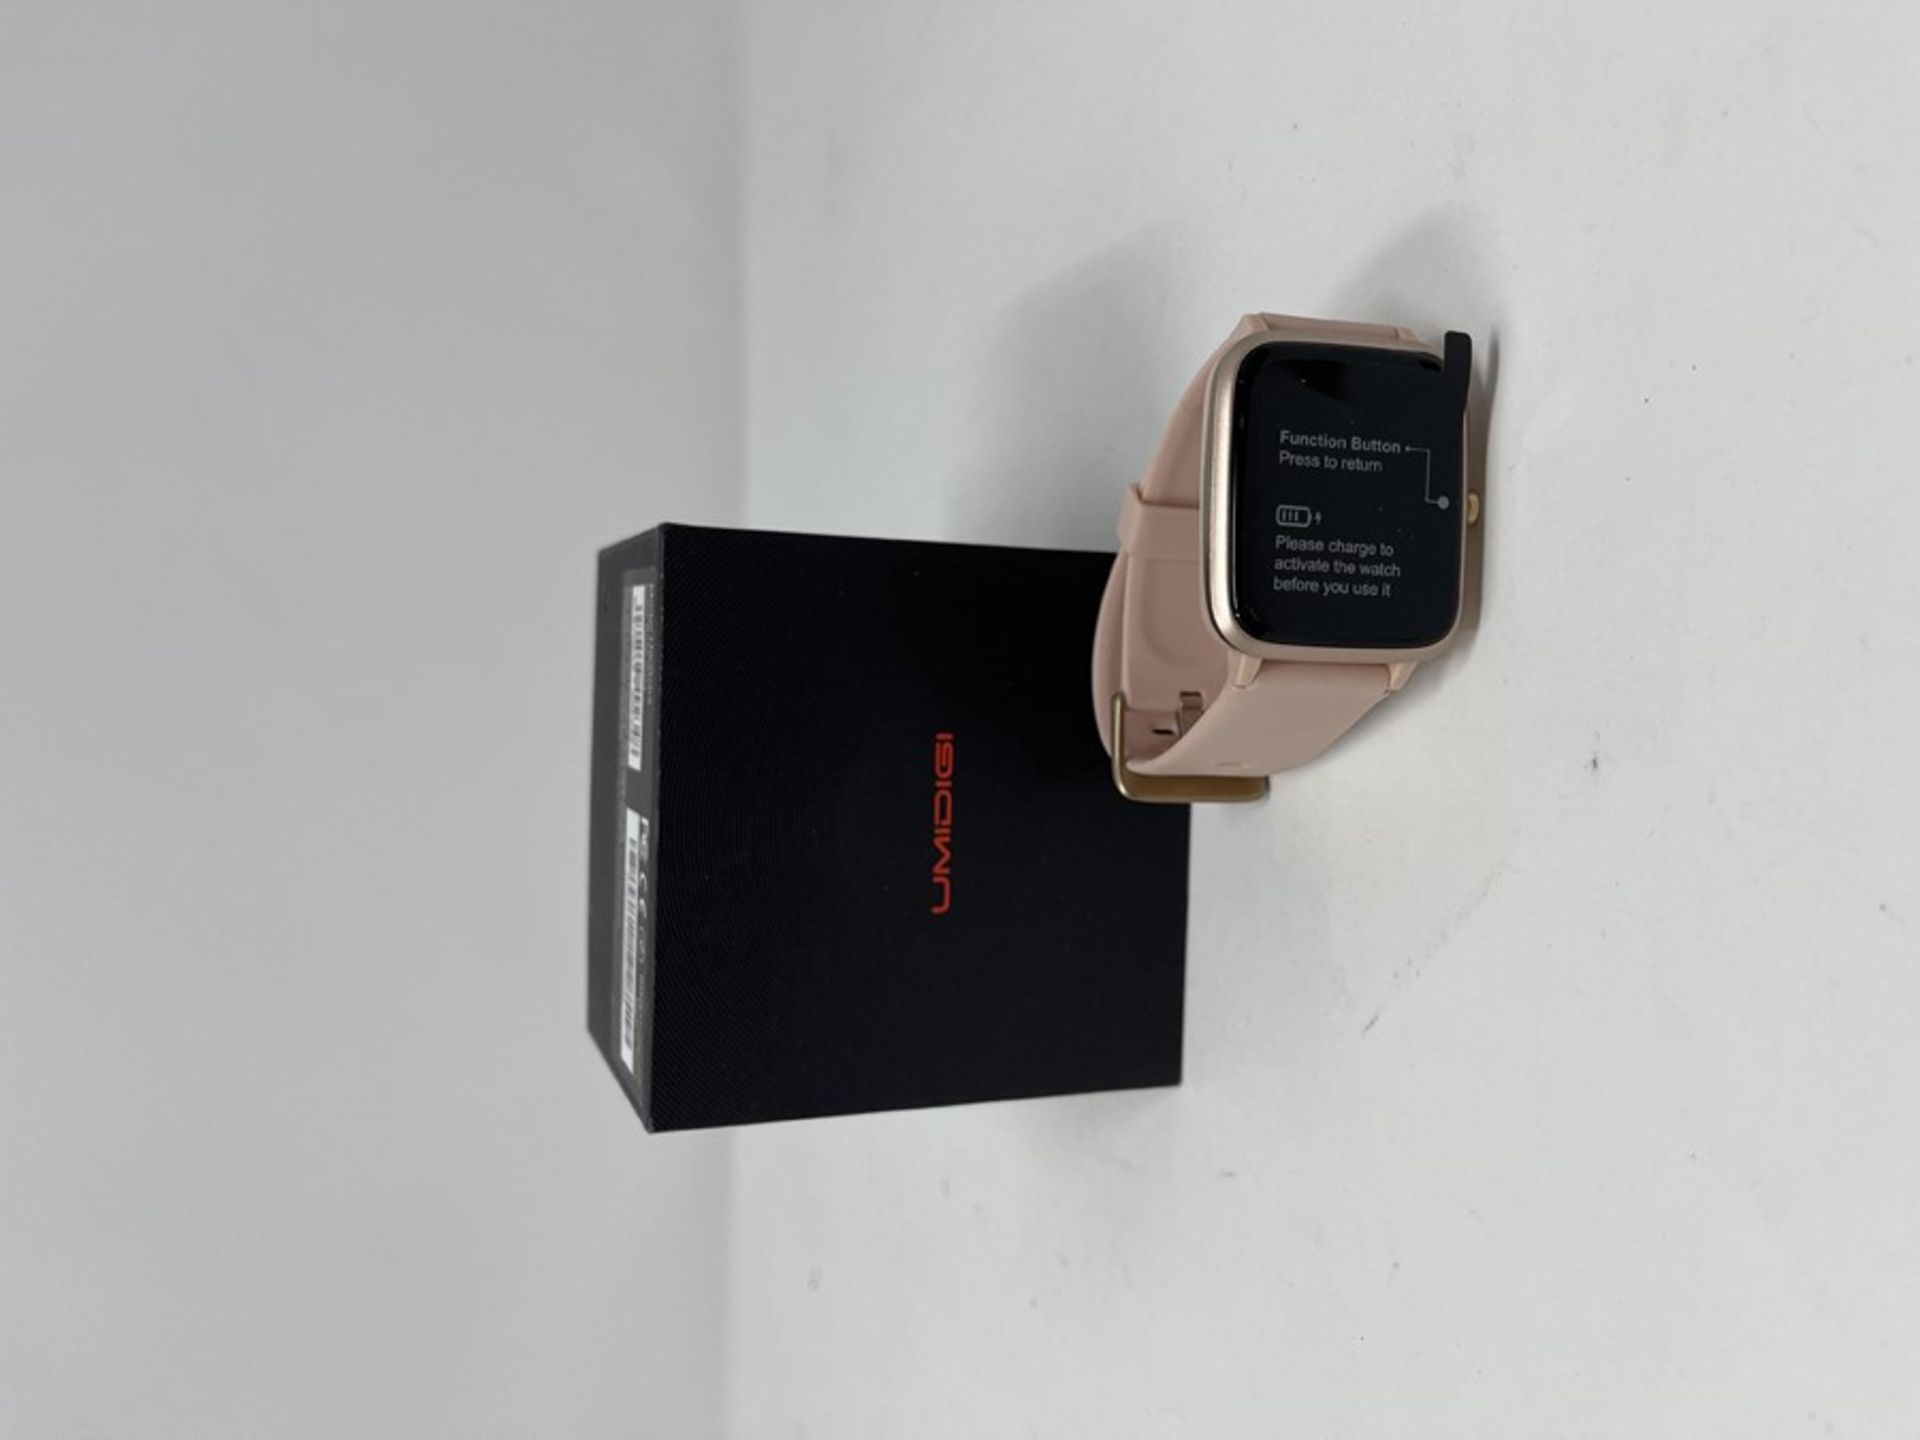 UMIDIGI Smart Watch, Uwatch3 GPS, Built-in GPS Sports Watch, Fitness Tracker Heart Rate Monitor - Image 2 of 2